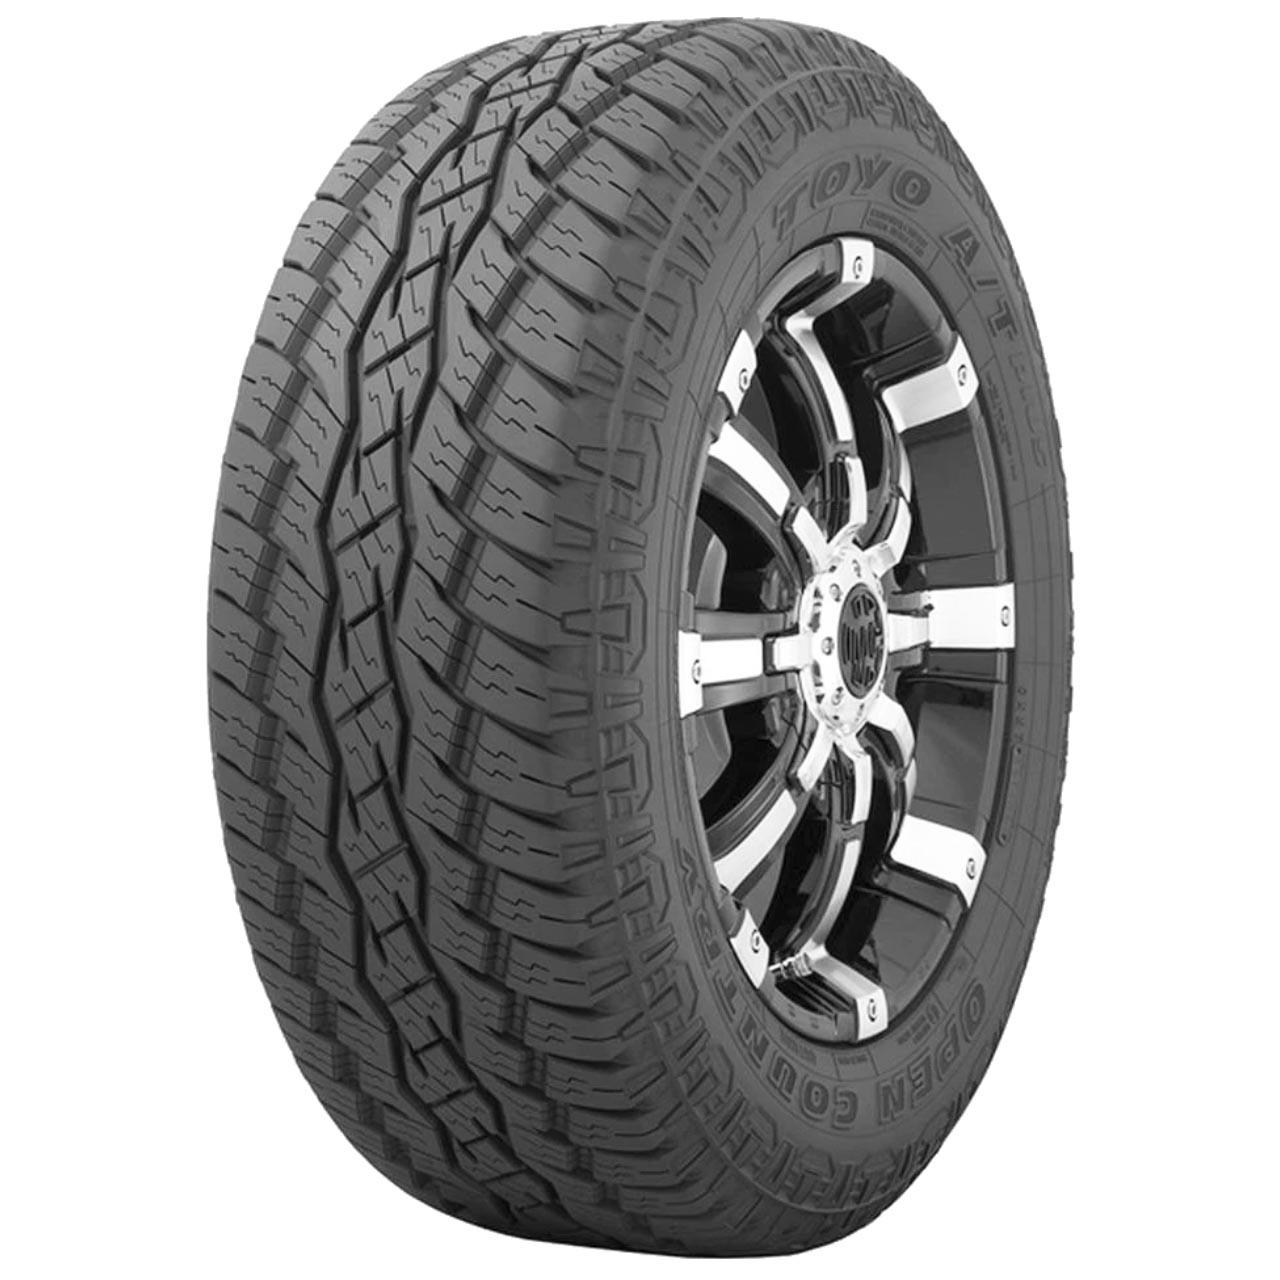 Toyo Open Country AT Plus 265/70R15 112T